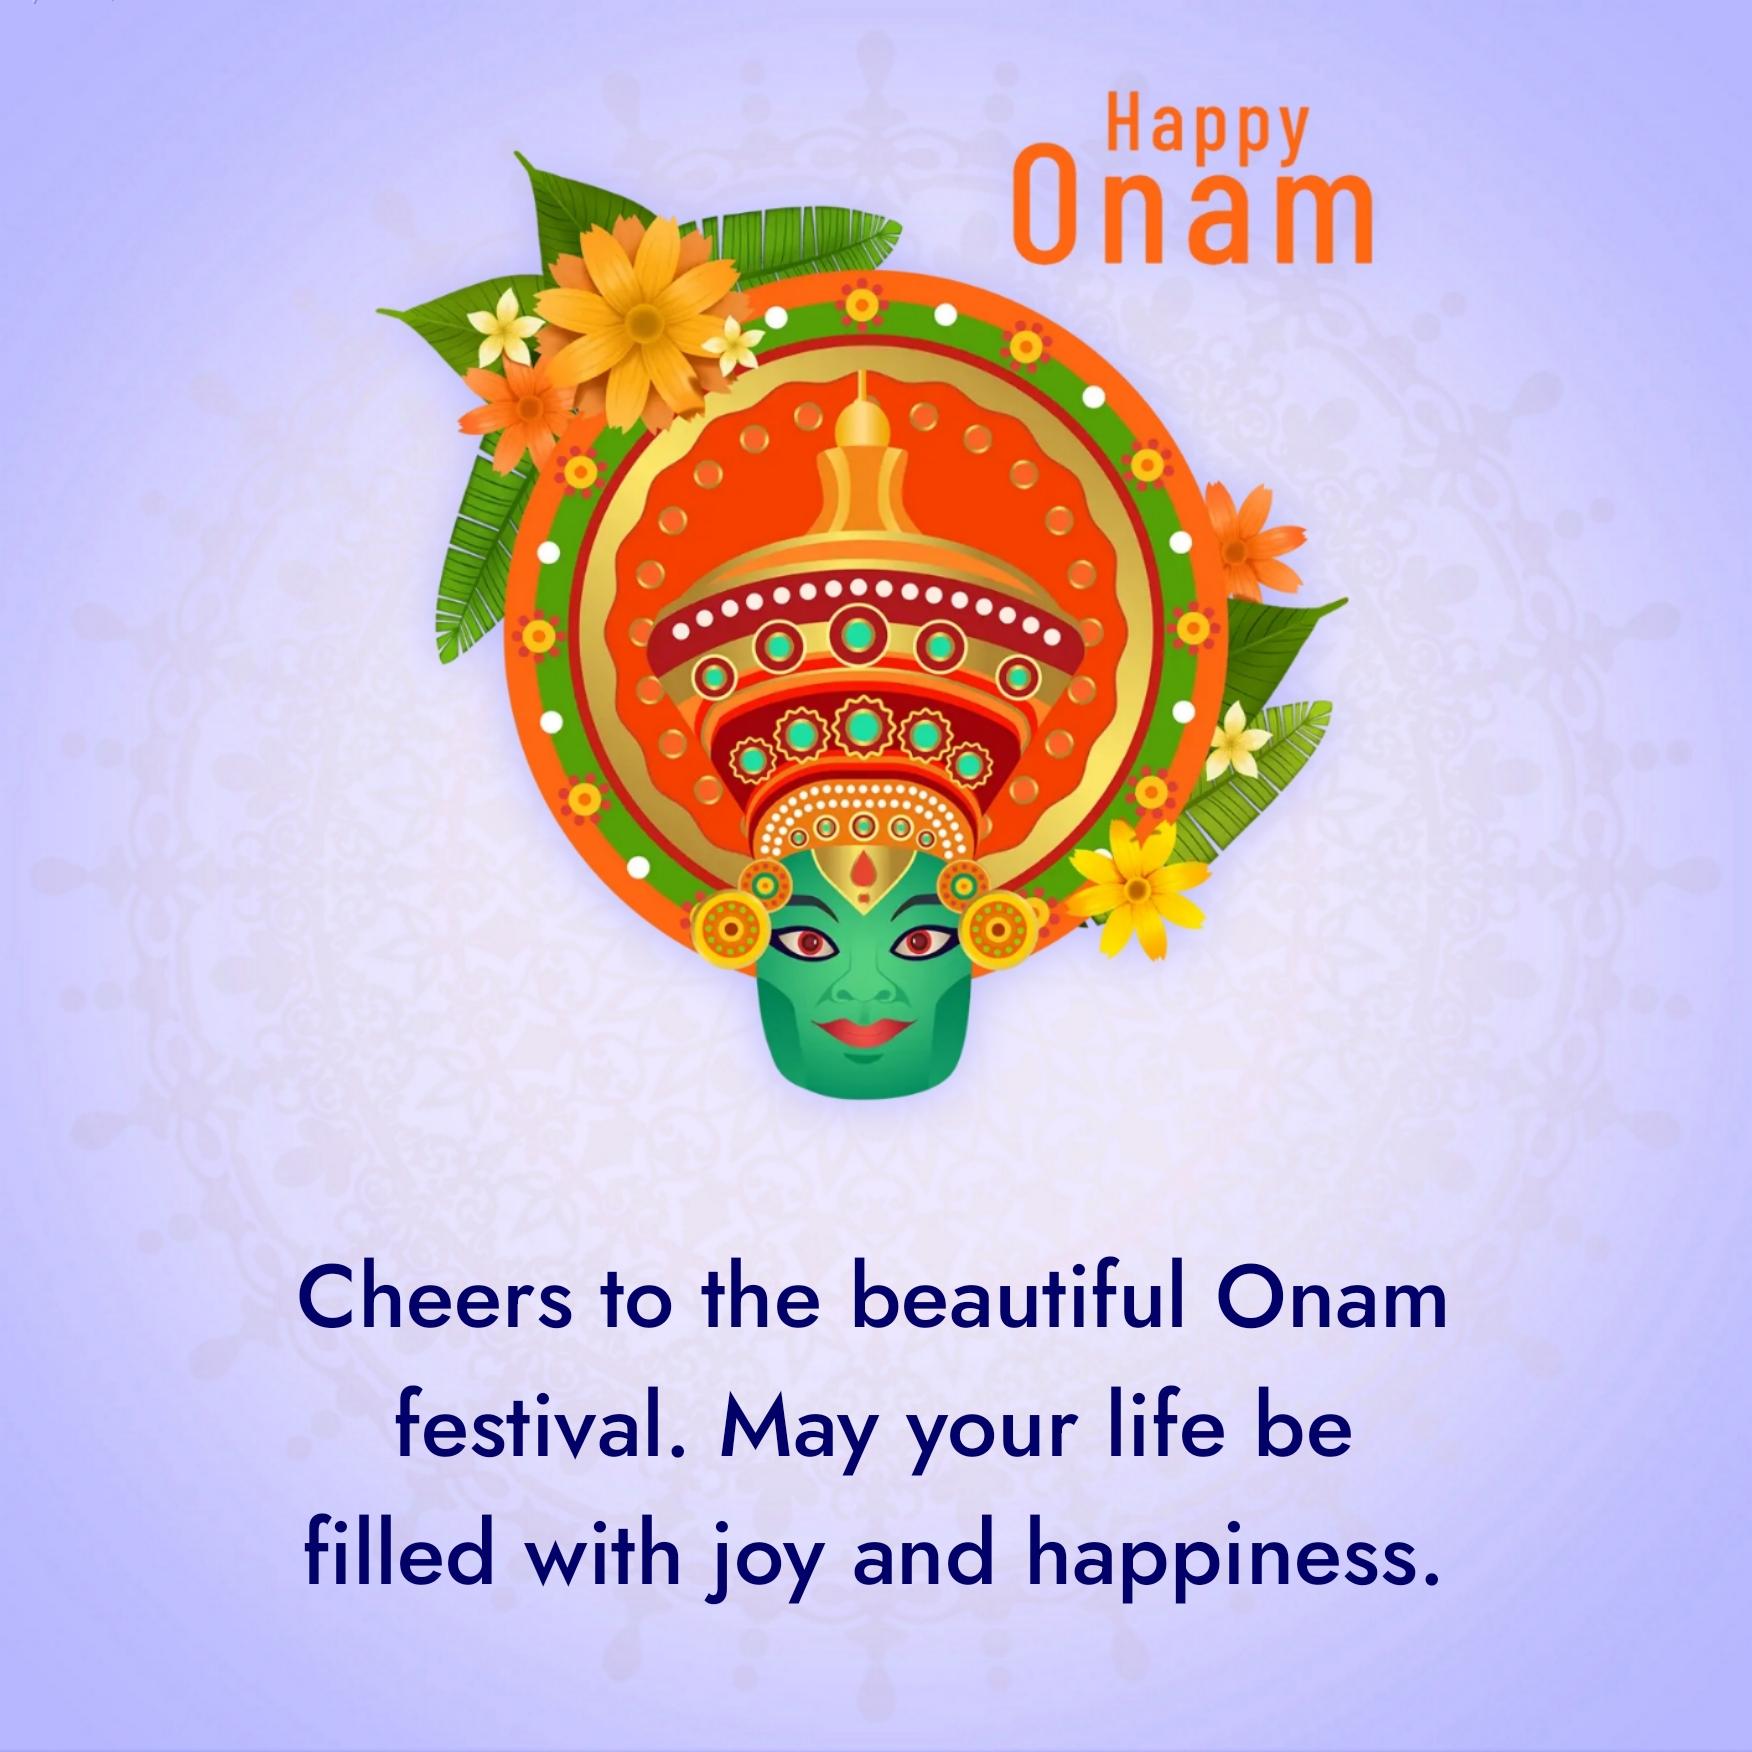 Cheers to the beautiful Onam festival May your life be filled with joy